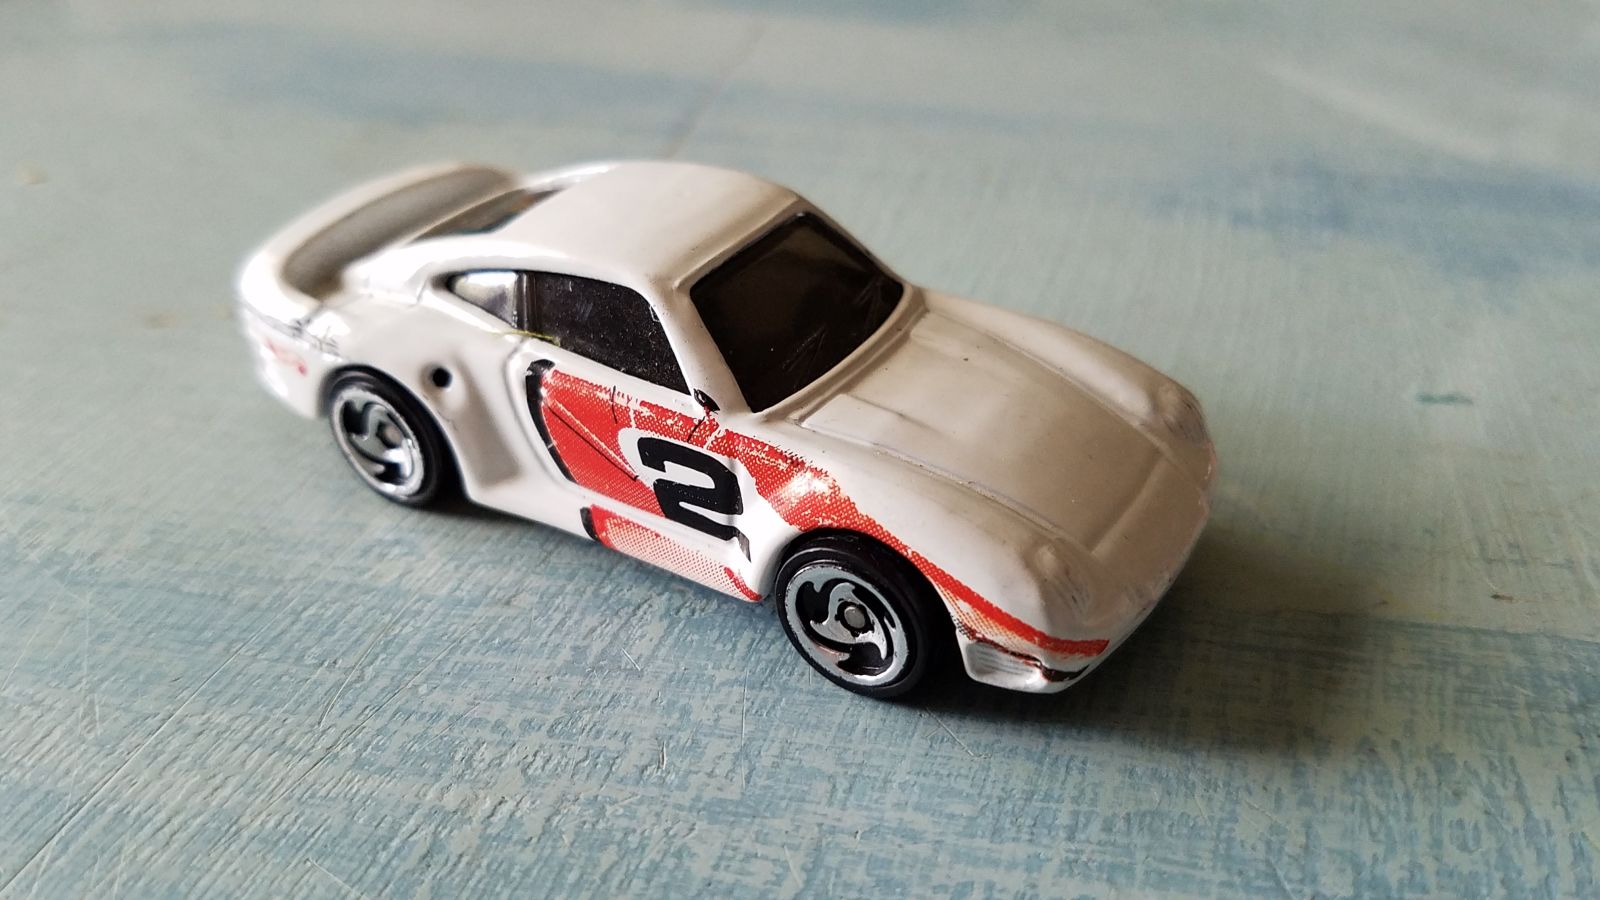 The 959 was in great condition. Especially considering it was in a bin with a bunch of other loose cars and other random toys. 